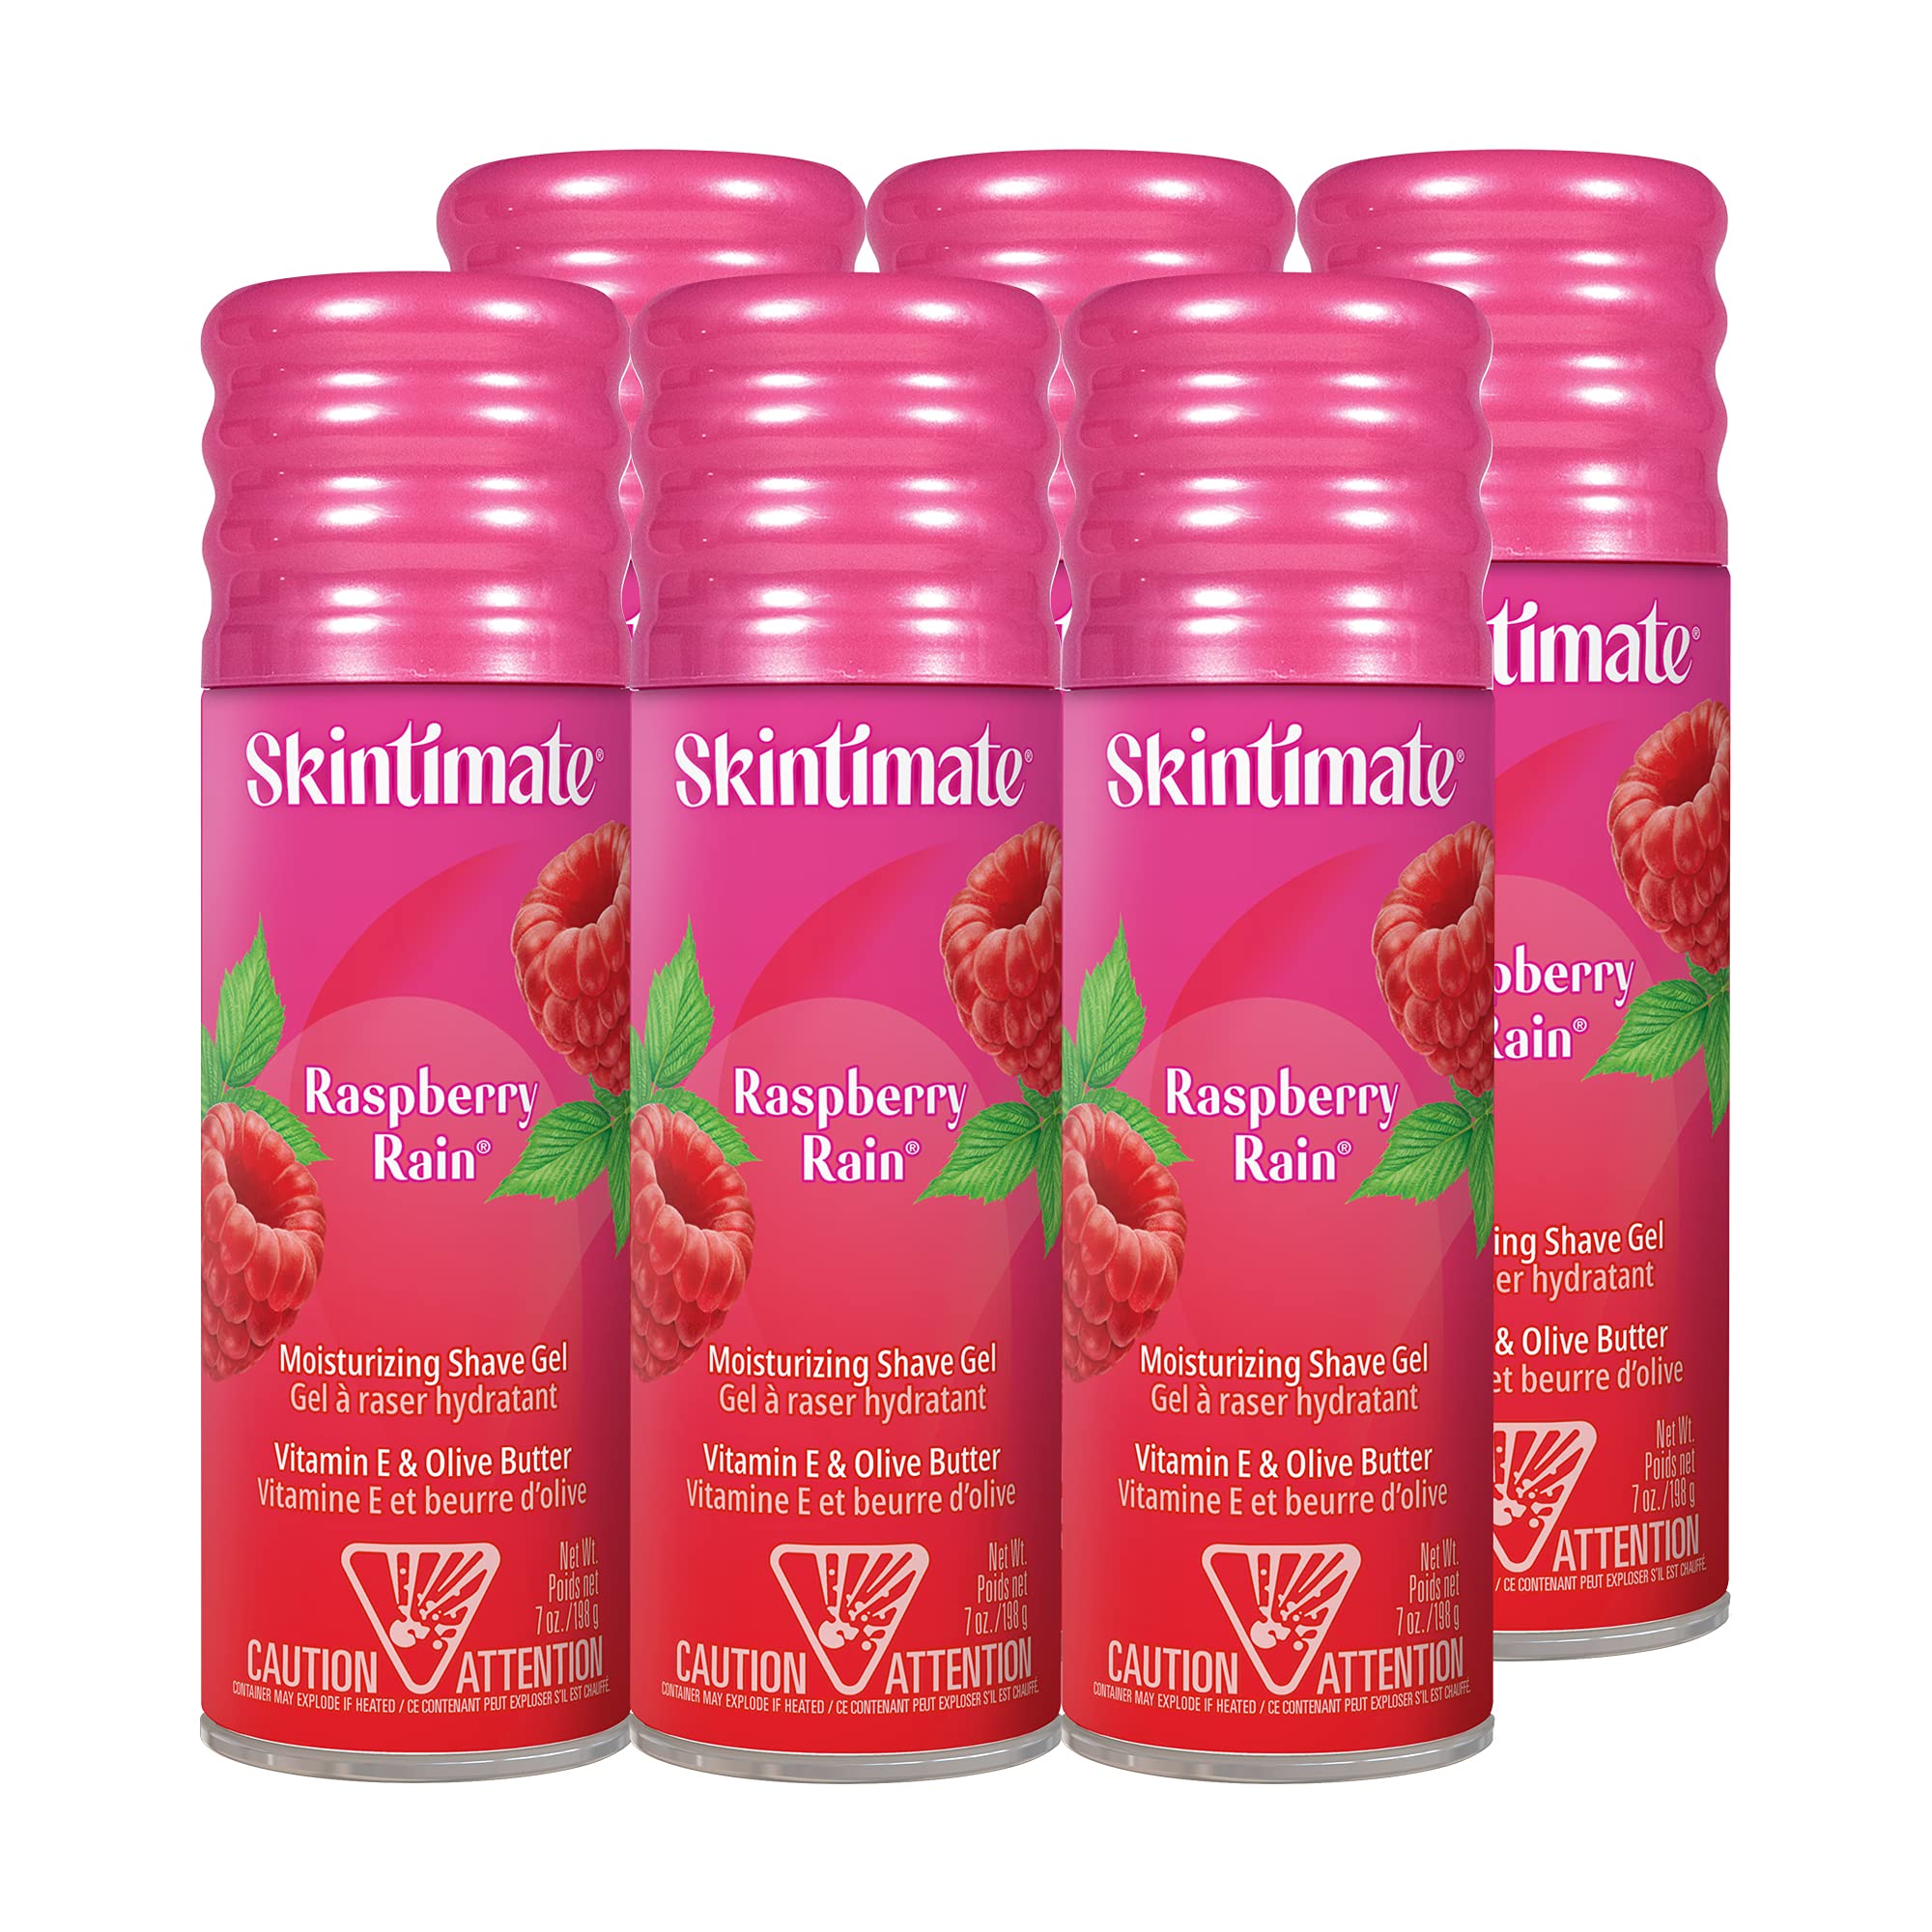 6-Pack 7-Oz Skintimate Signature Scents Moisturizing Shave Gel for Women (Raspberry Rain) $12.20 ($2.03 Ea) w/ S&S + Free Shipping w/ Prime or on $35+